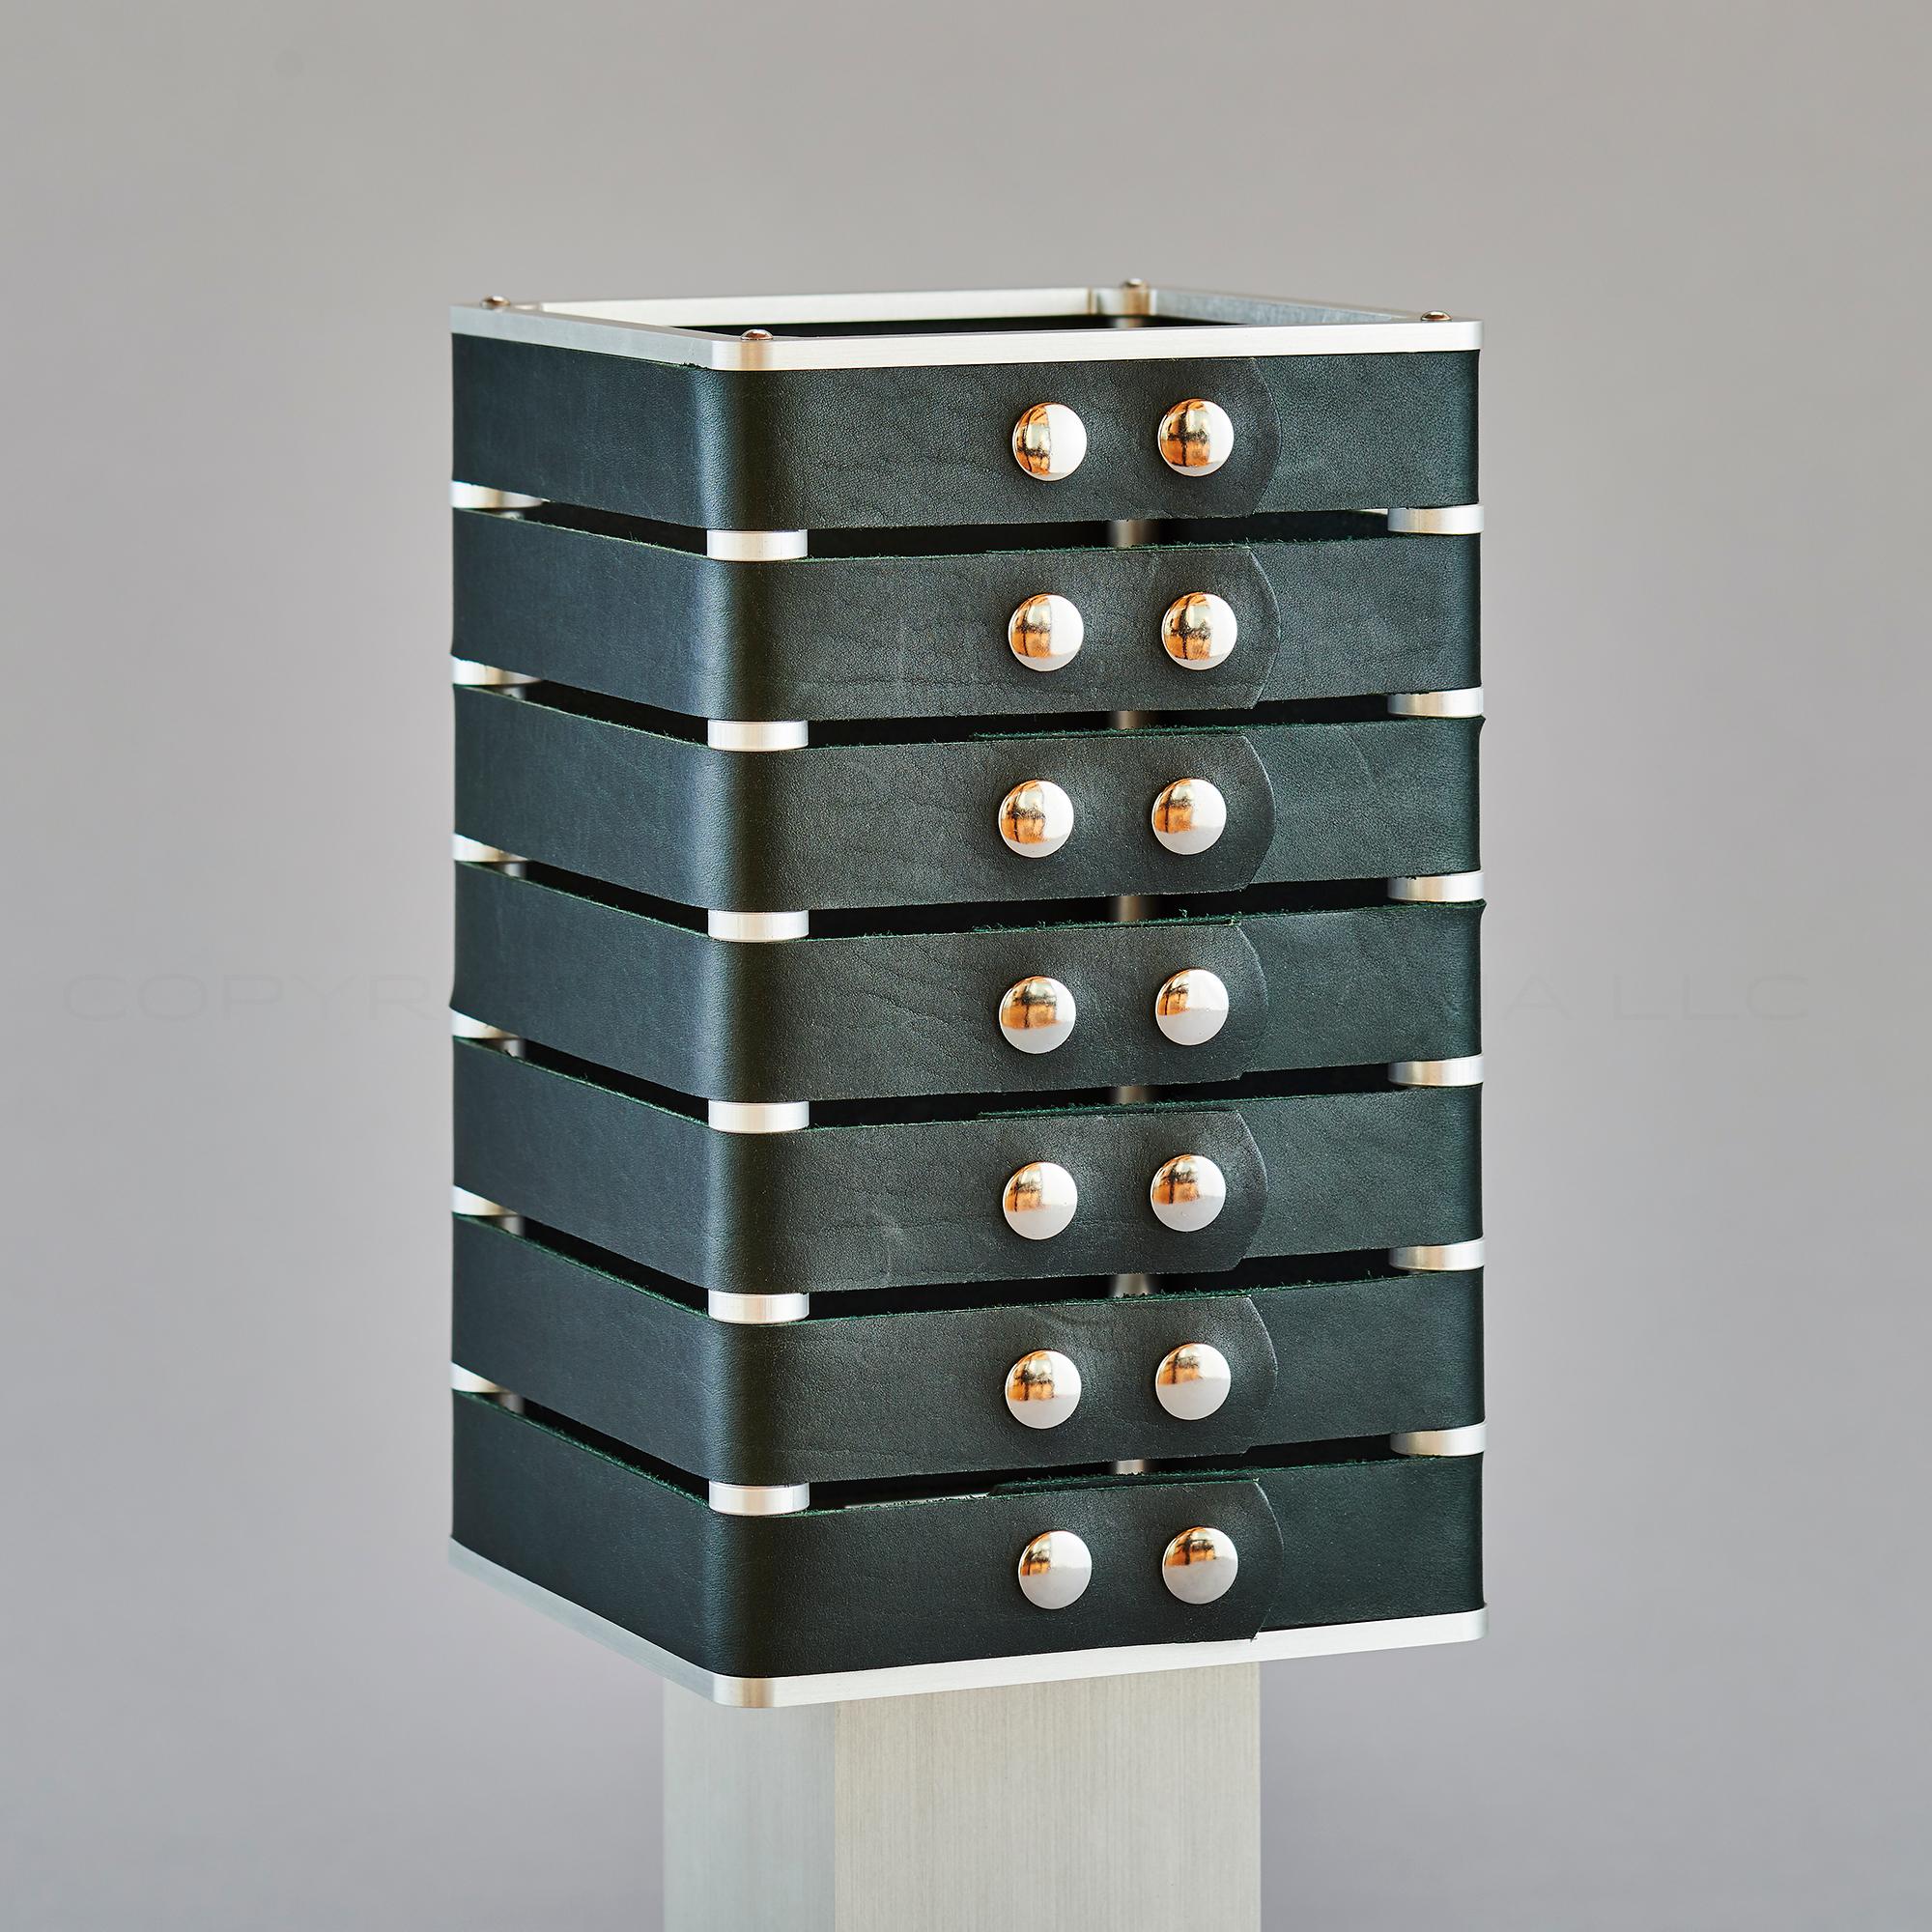 Contemporary Modern, Minimal, Solid Metal Table Light in Verde Green Italian Leather